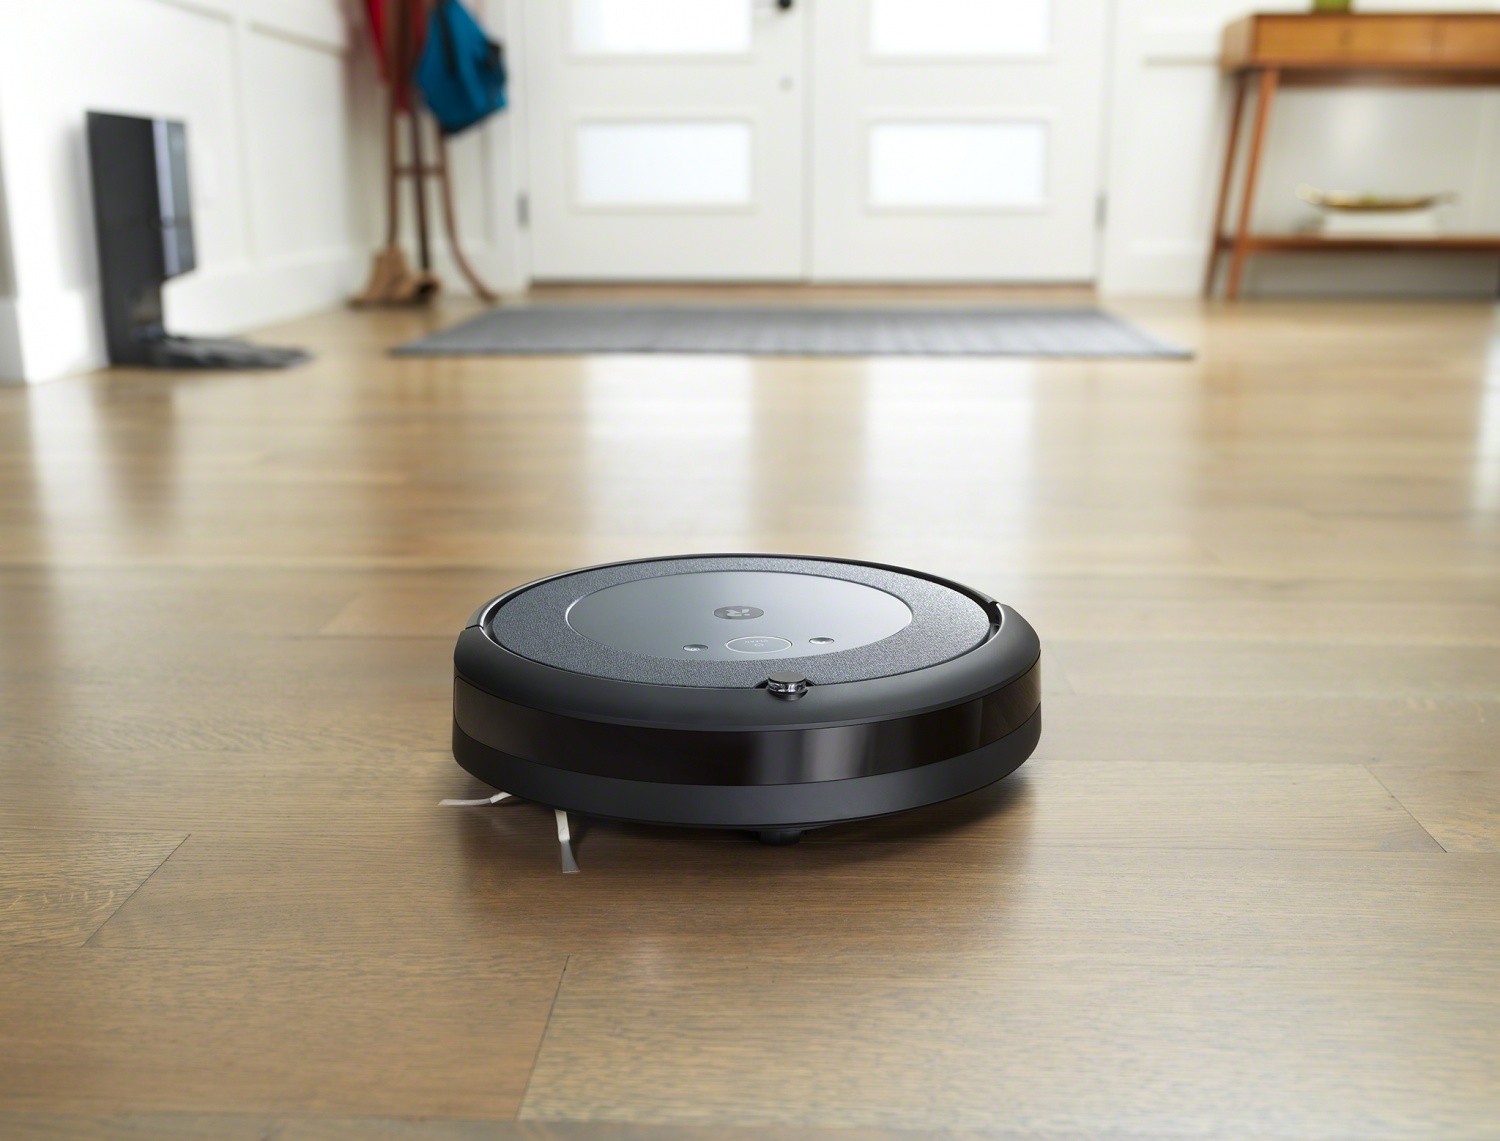 Black Friday Smart Home Deals: Save $95 with iRobot's Top-rated Roomba 694 